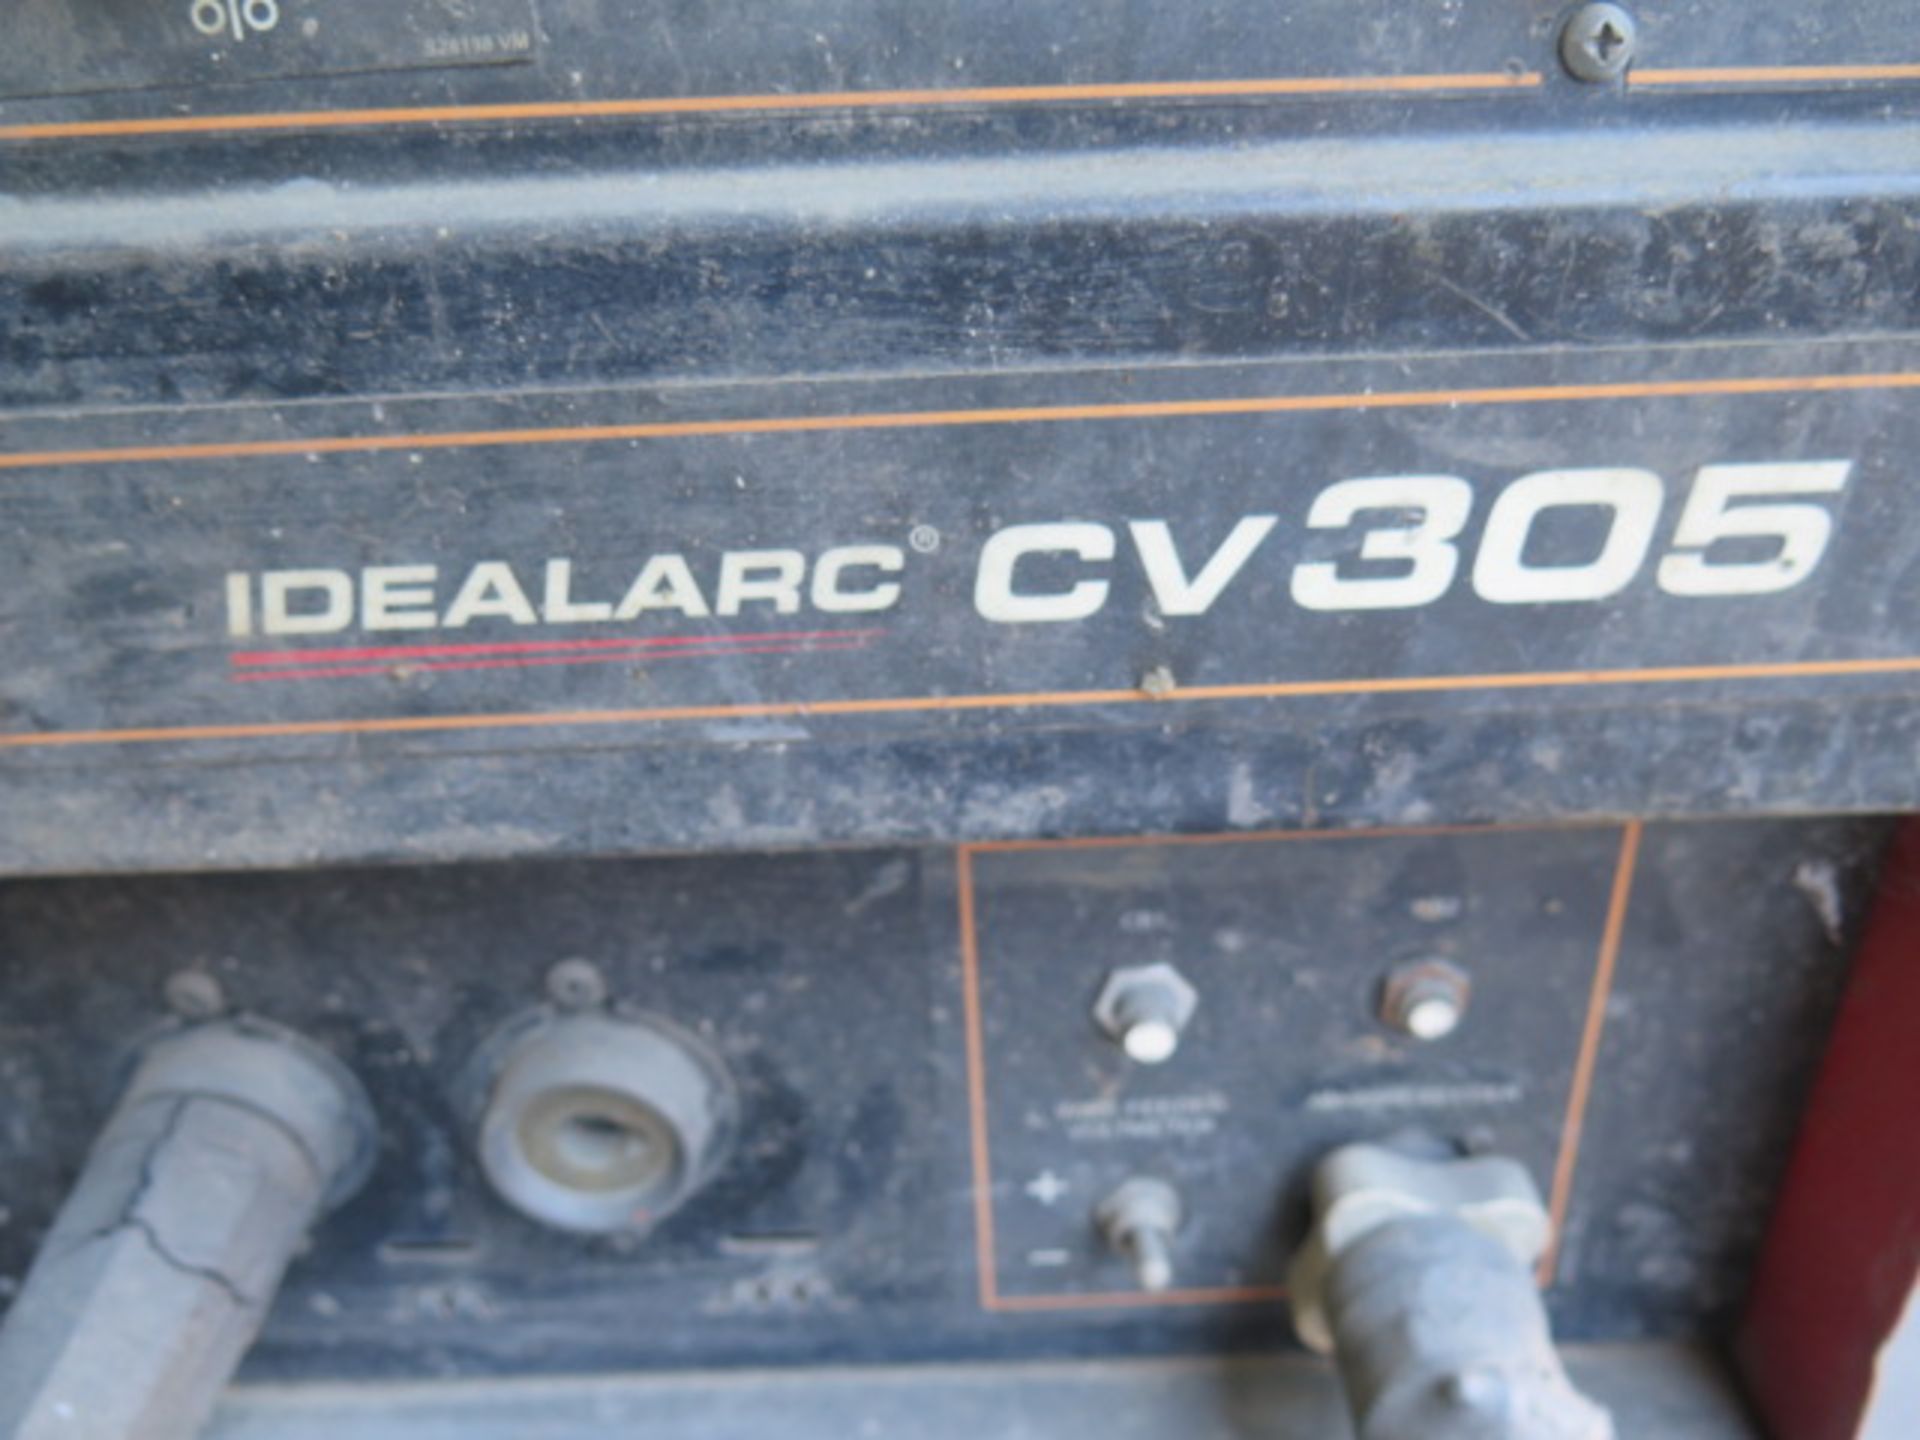 Lincoln Idealarc CV-305 Arc Welding Power Source w/ Lincoln LF-72 Wire Feeder - Image 4 of 8